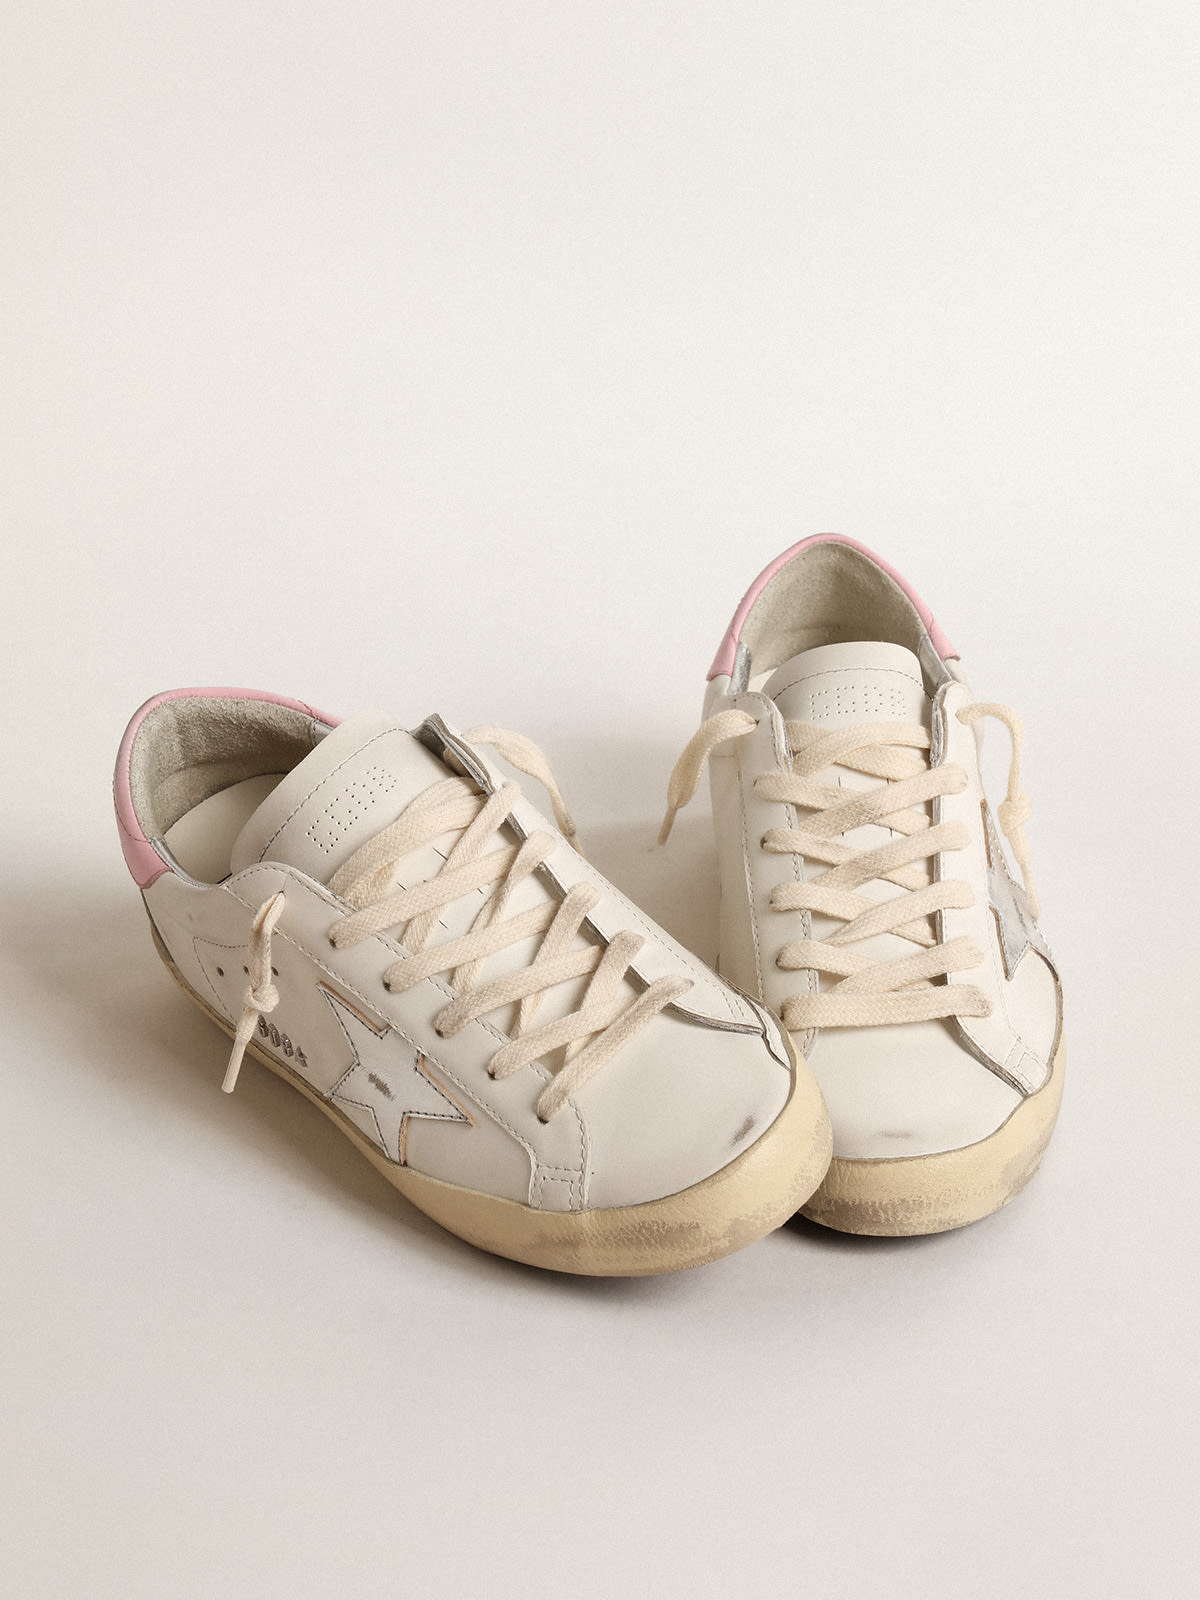 Super-Star with silver leather star and pink heel tab | Golden Goose